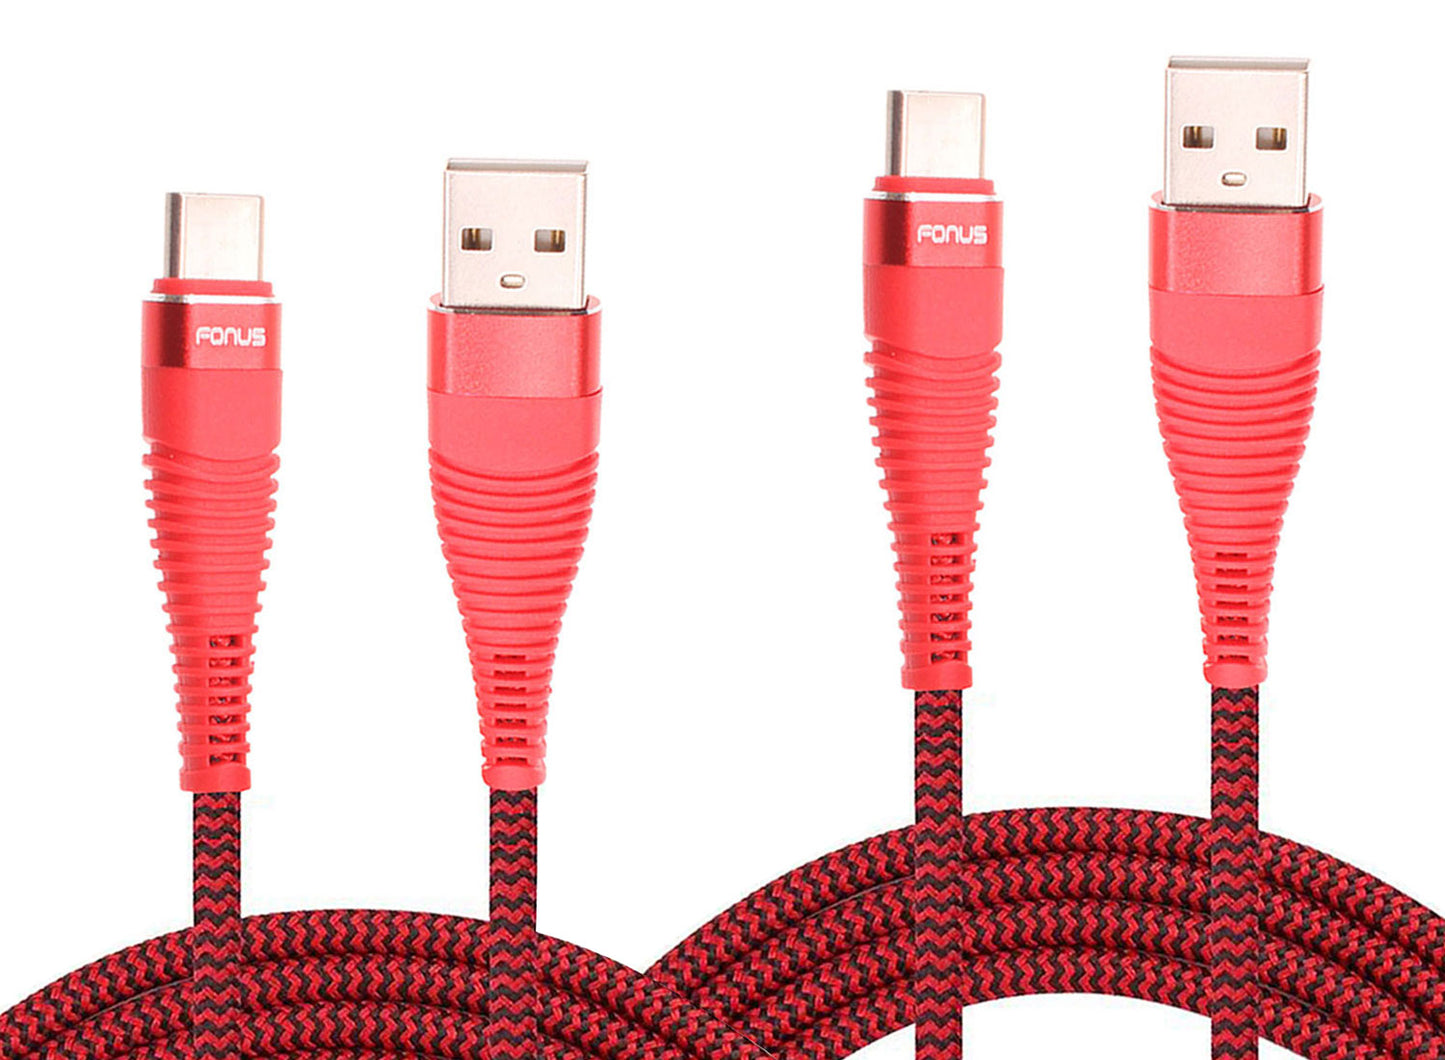  6ft and 10ft Long USB-C Cables   Fast Charge   TYPE-C Cord   Power Wire   Data Sync   Red Braided   - ONJ21+J53 1995-1